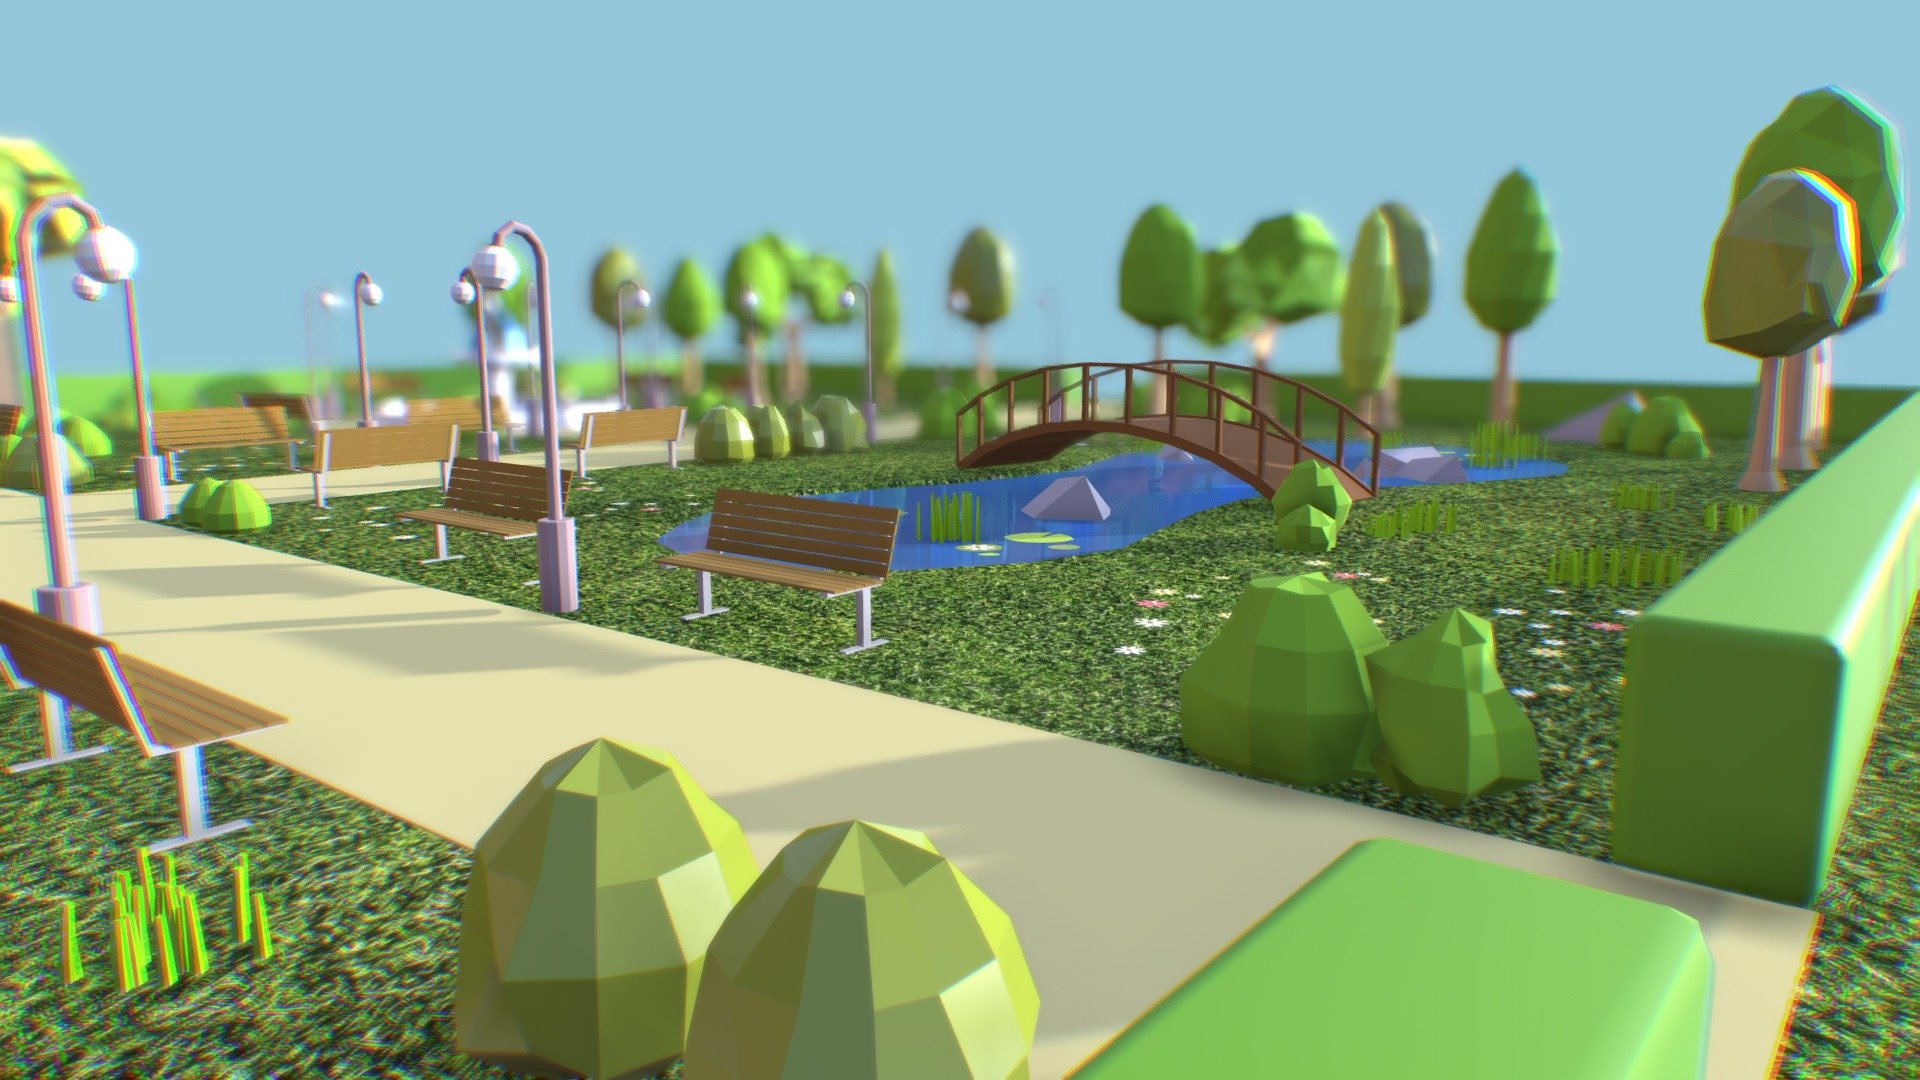 Low Poly Park

Model is Low Poly - Not made for subdivision

||USAGE||

This model is suitable for use in broadcast, high-res film close-ups, advertising, design visualization, forensic presentation, etc.]
The model is accurate with the real world size and scale.
Just open the scene and start rendering !
||SPECIFICATIONS||

This model contains 1 grouped objects.
This model contains 50503 polygons.
Dim size aprox : 42 m x 50 m x 5 mH - park - Buy Royalty Free 3D model by bboycafard 3d model